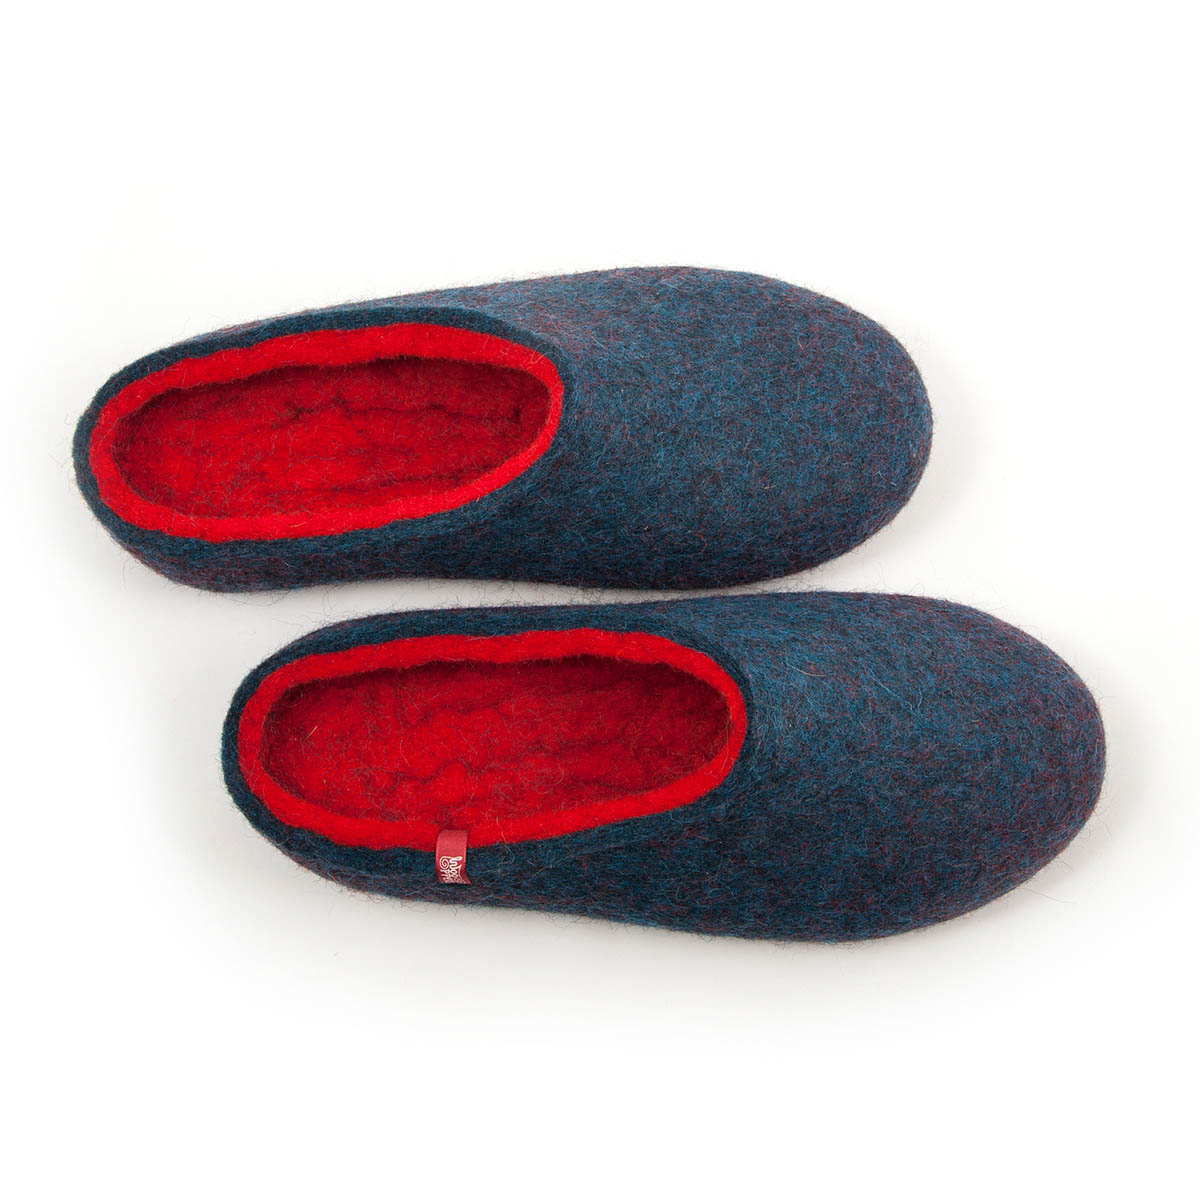 House slippers “COLORI” blue – red